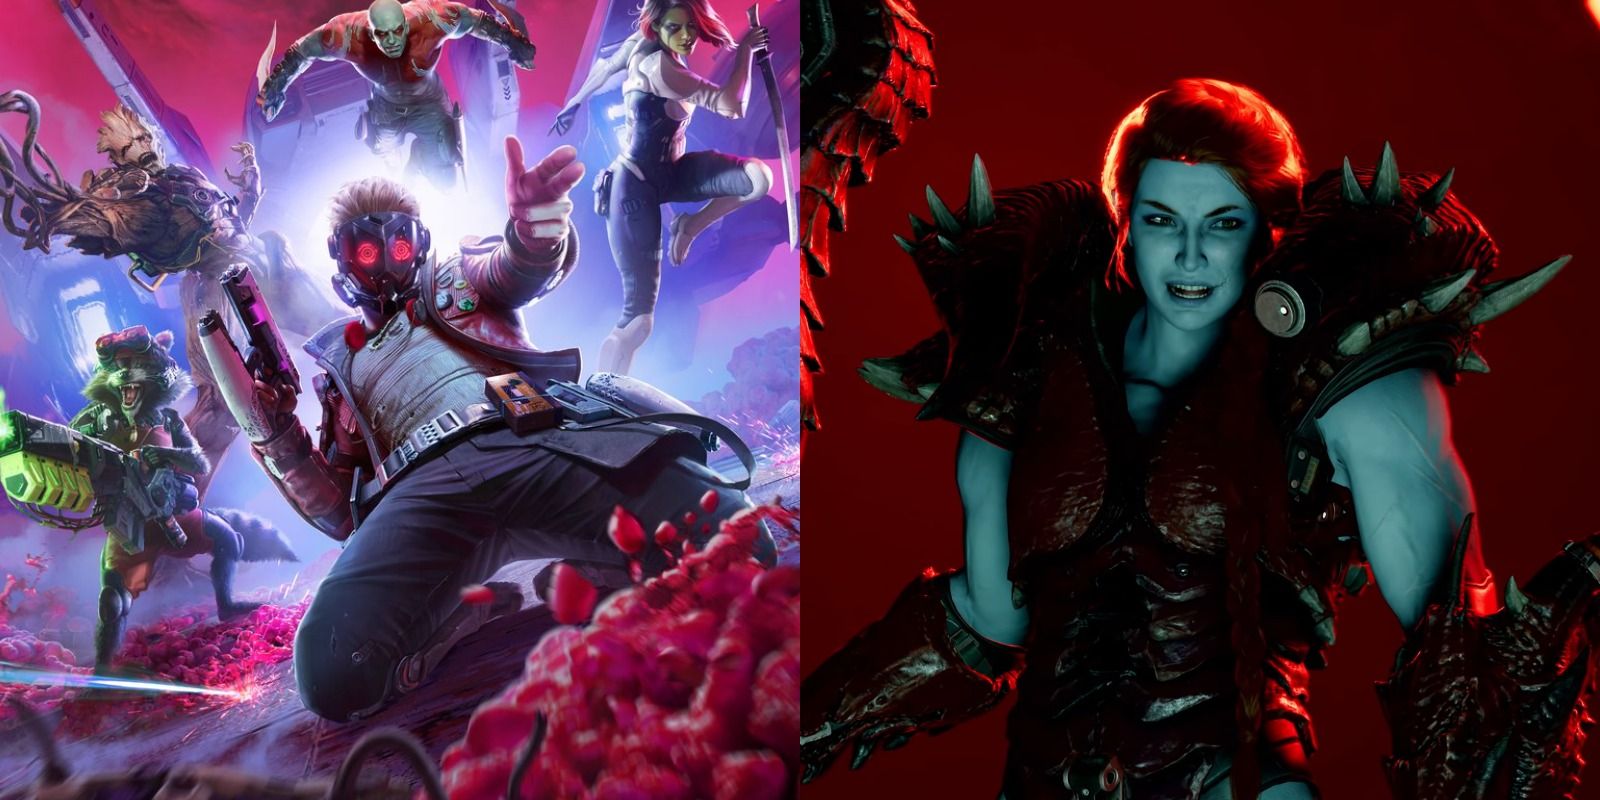 Promo images from the Guardians of the Galaxy video game